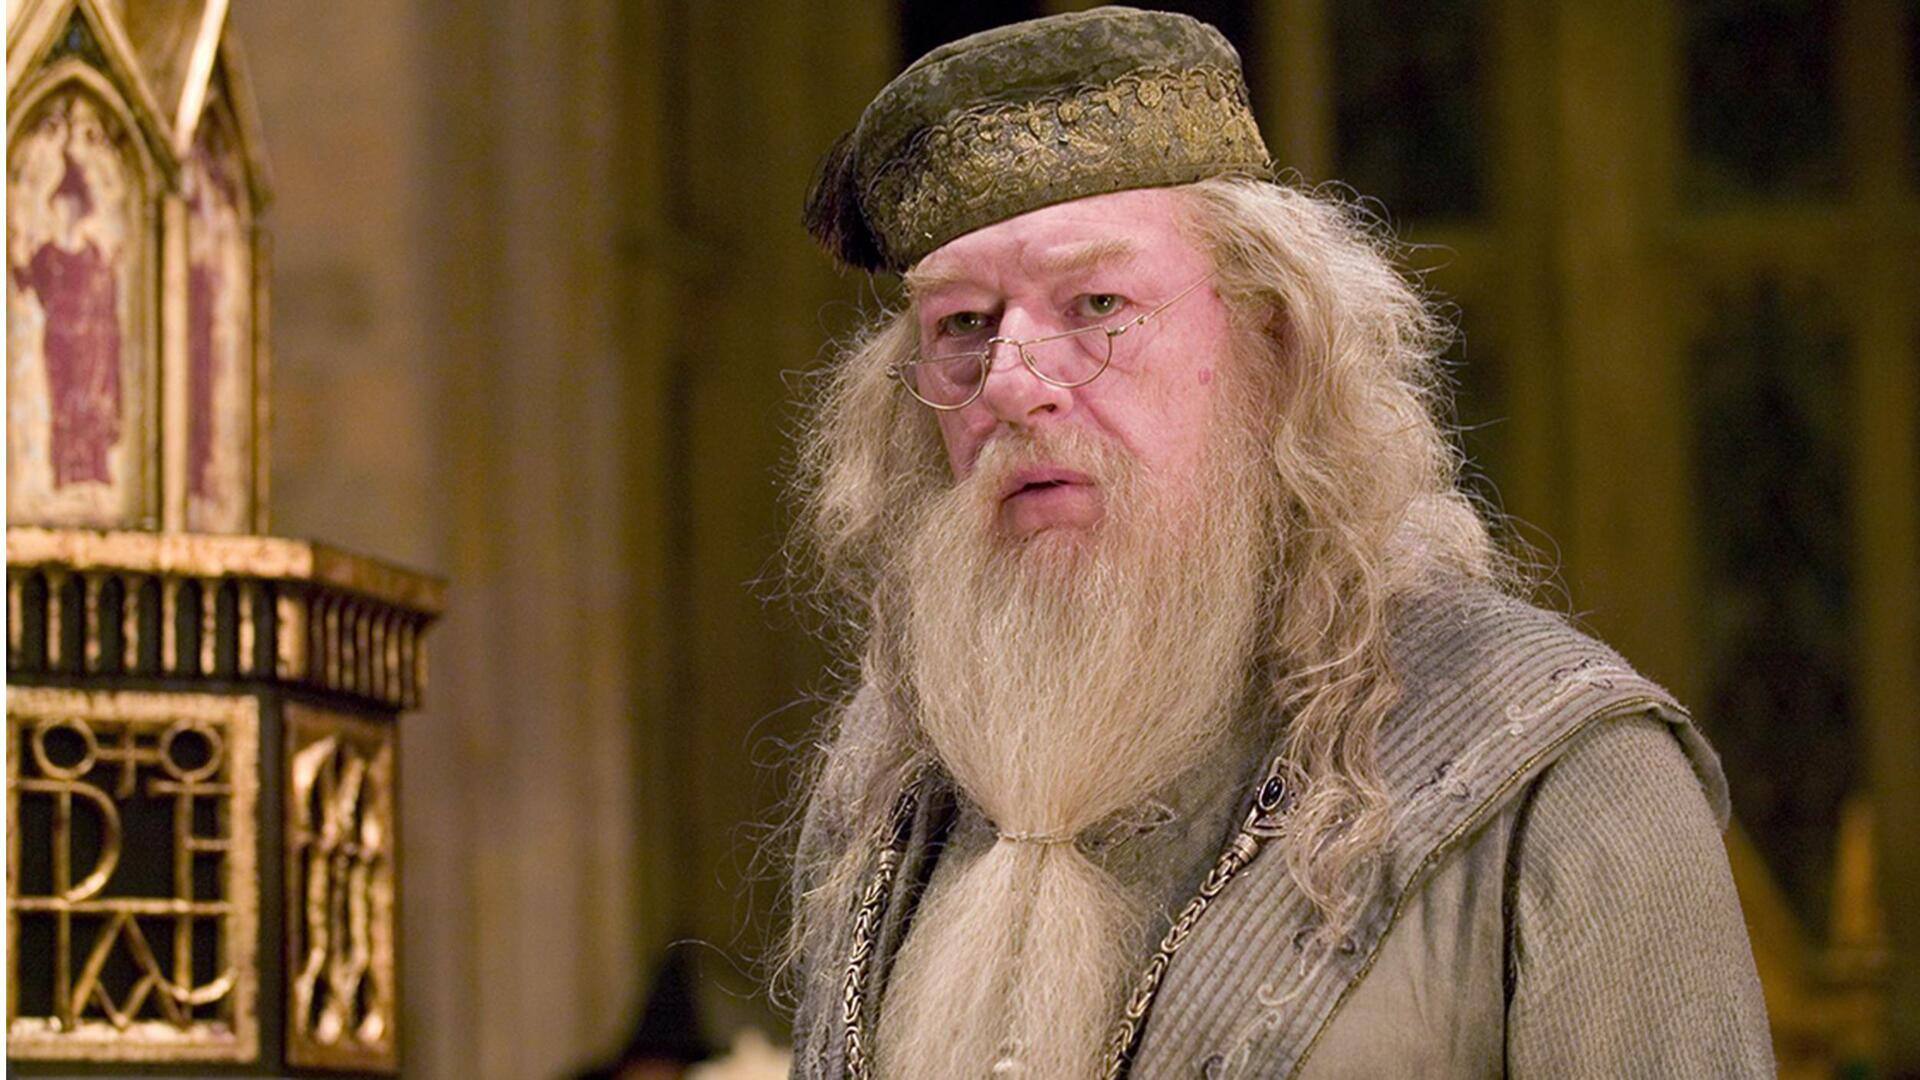 'Harry Potter' actor Michael Gambon (82), who played Dumbledore, dies